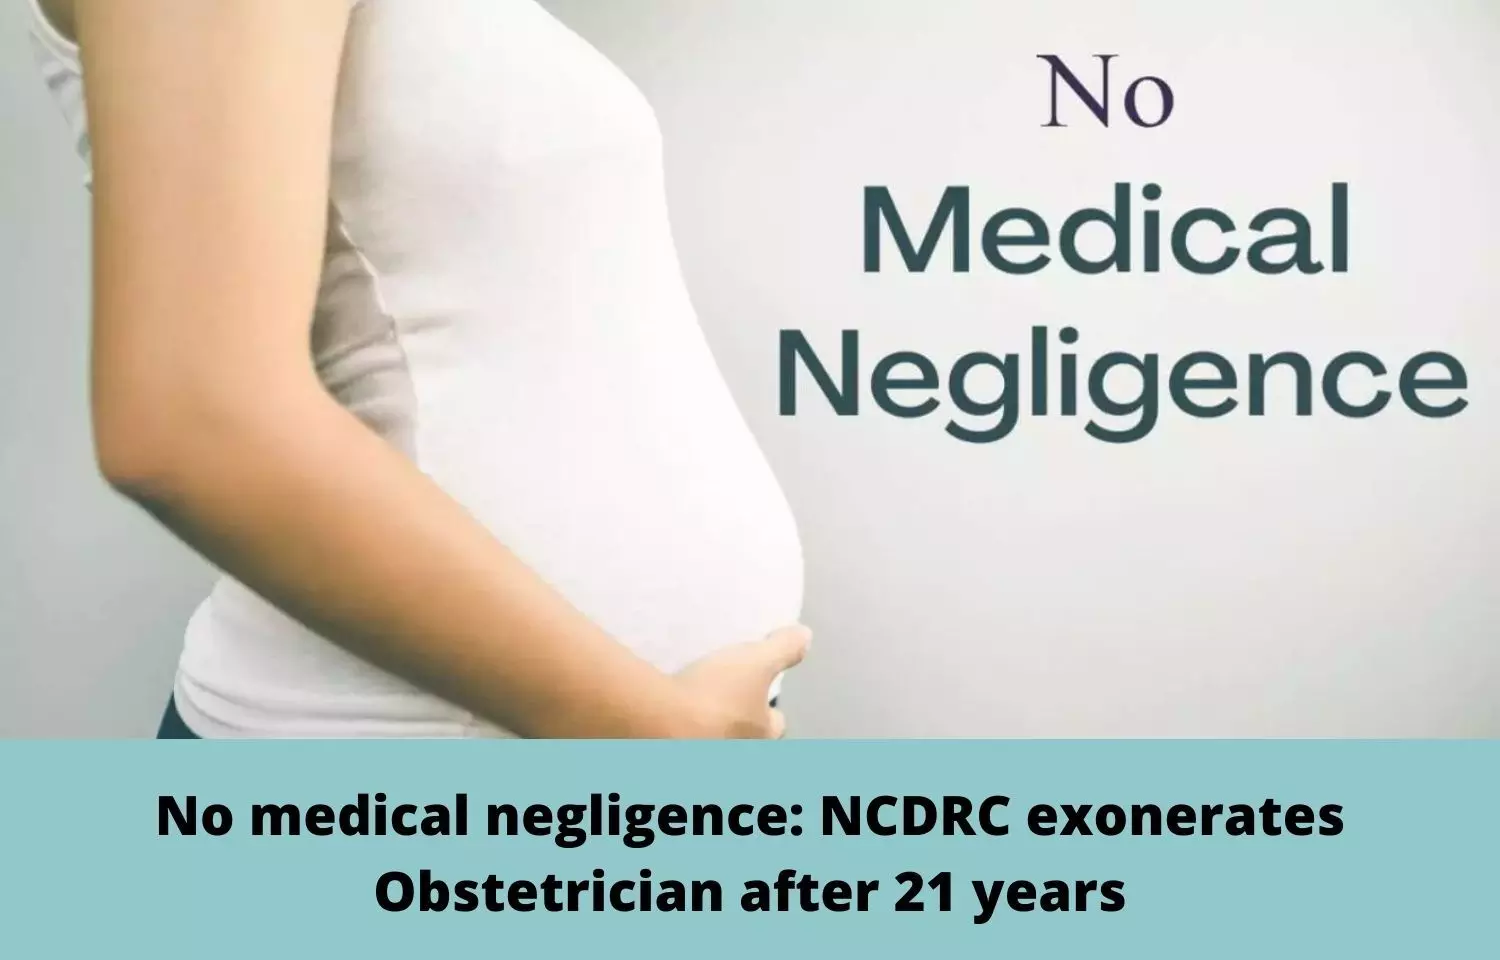 No medical negligence: NCDRC exonerates Obstetrician after 21 years